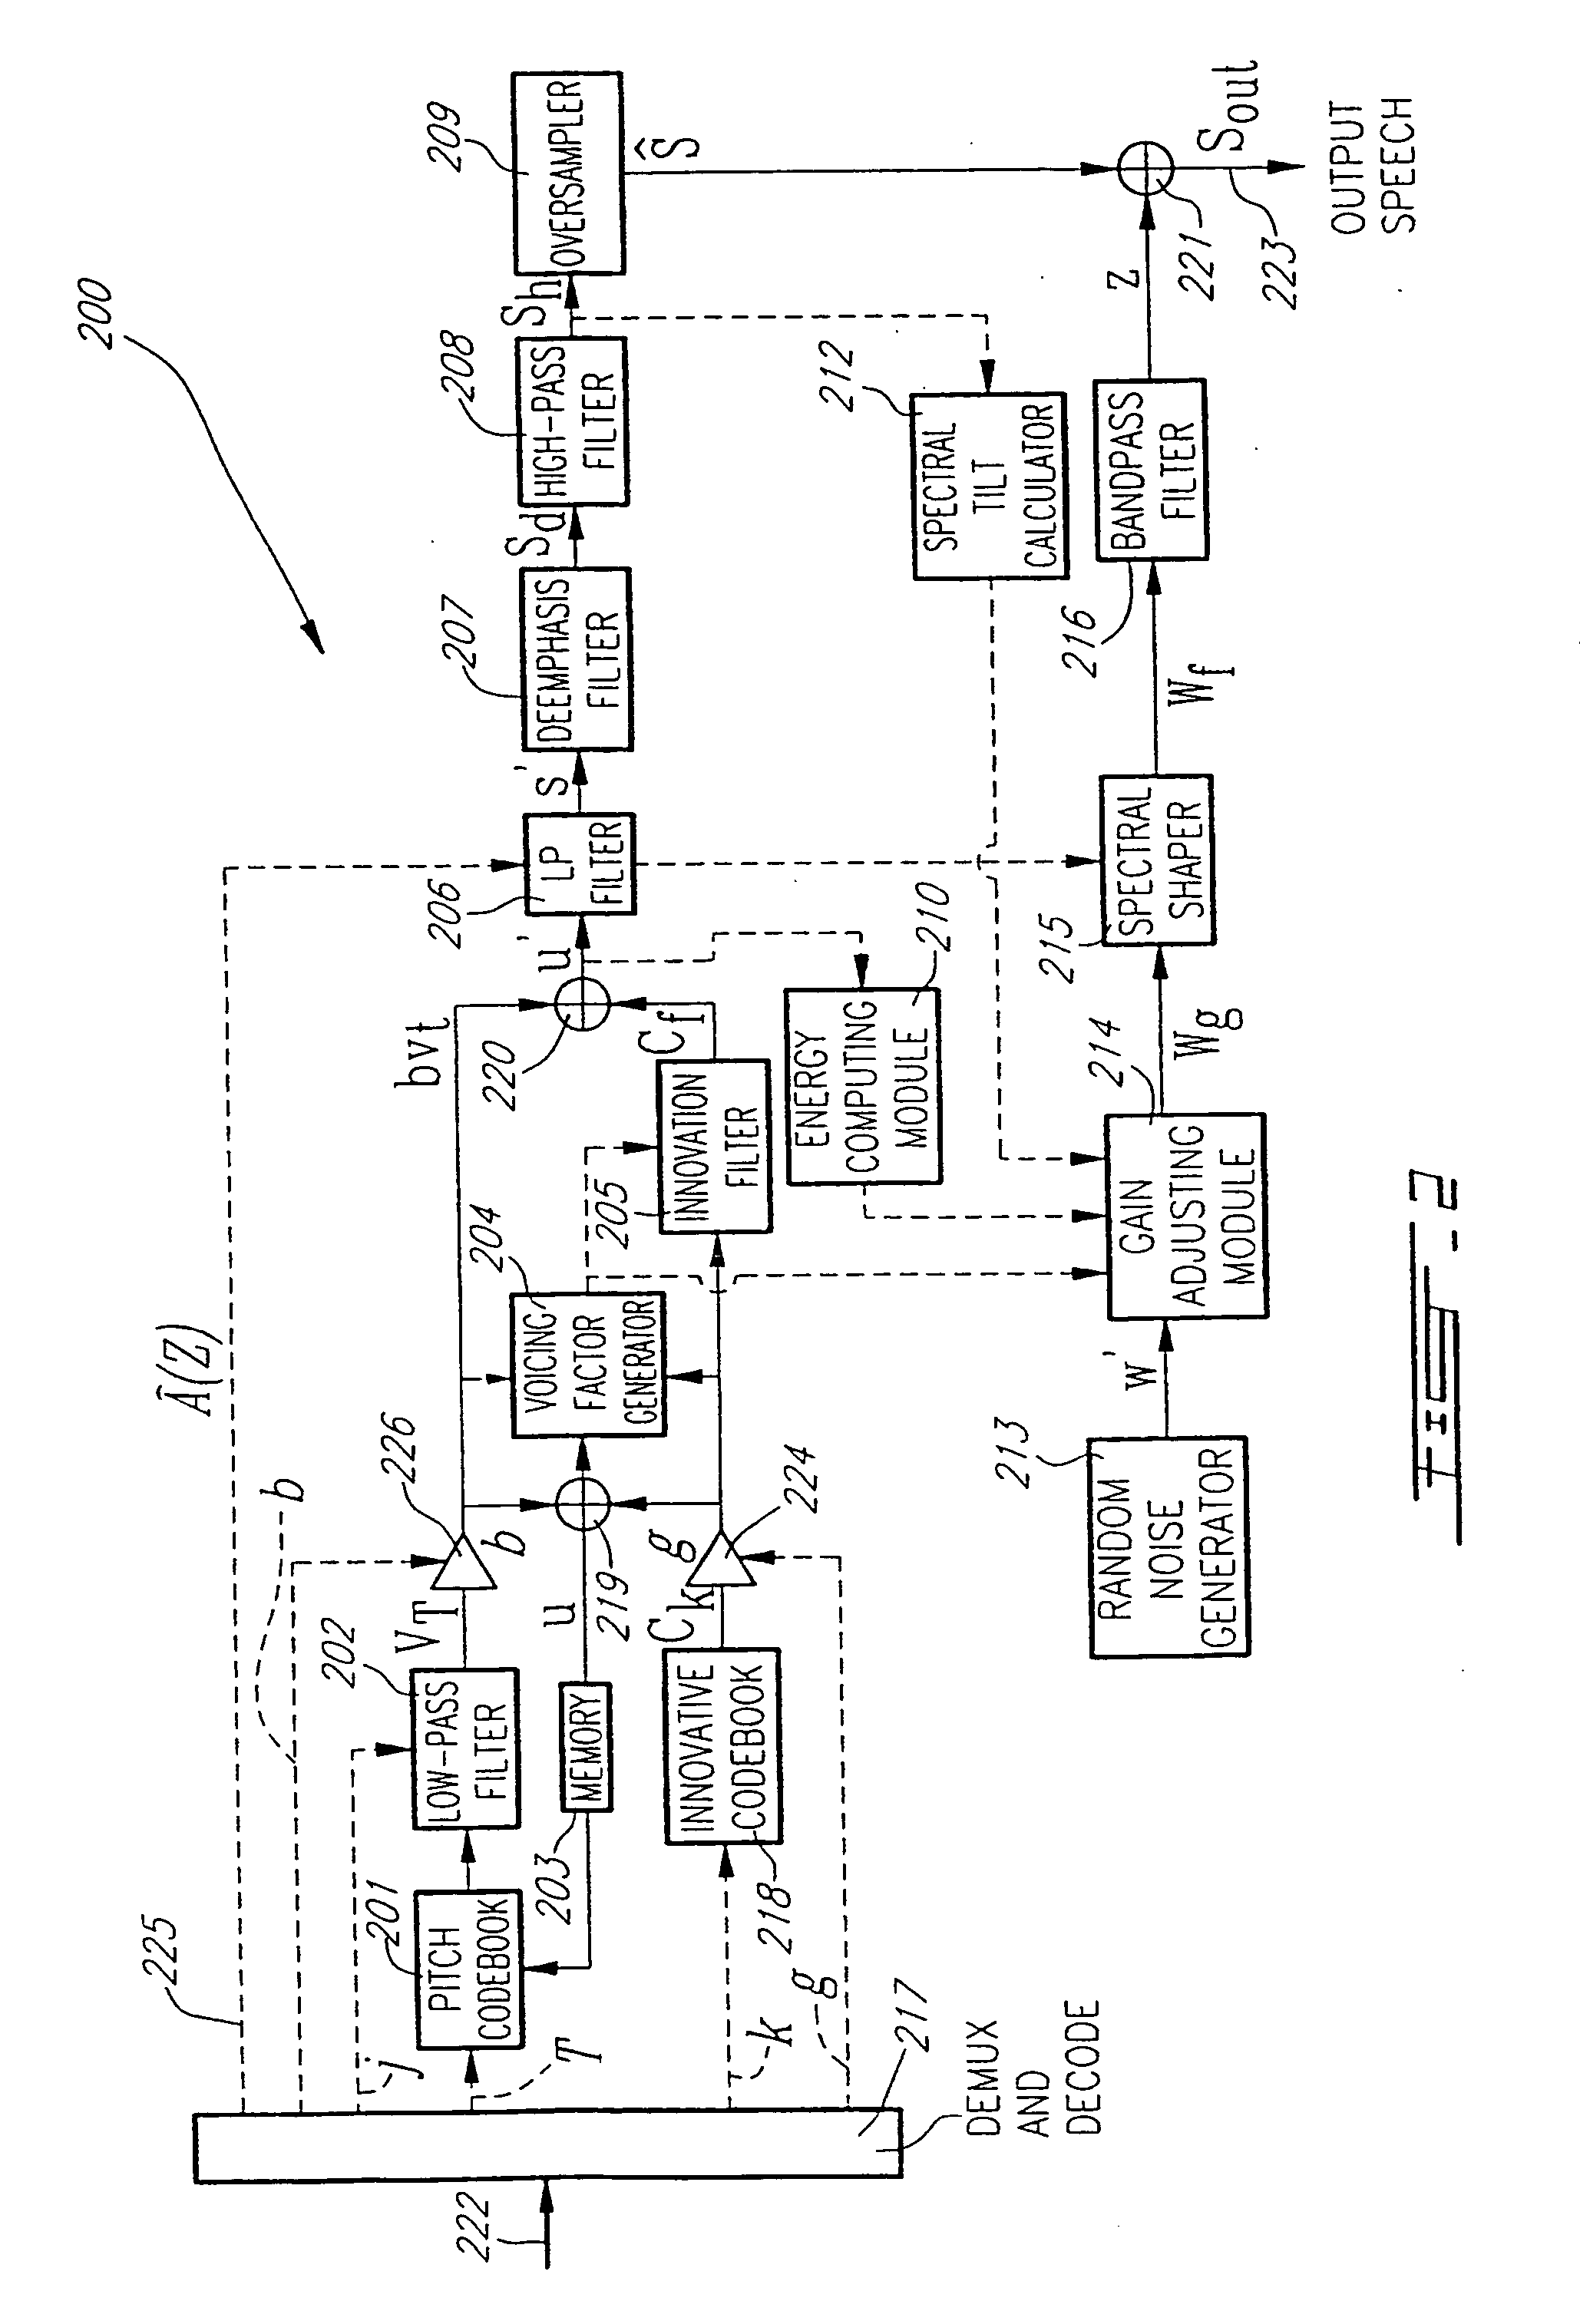 Perceptual weighting device and method for efficient coding of wideband signals